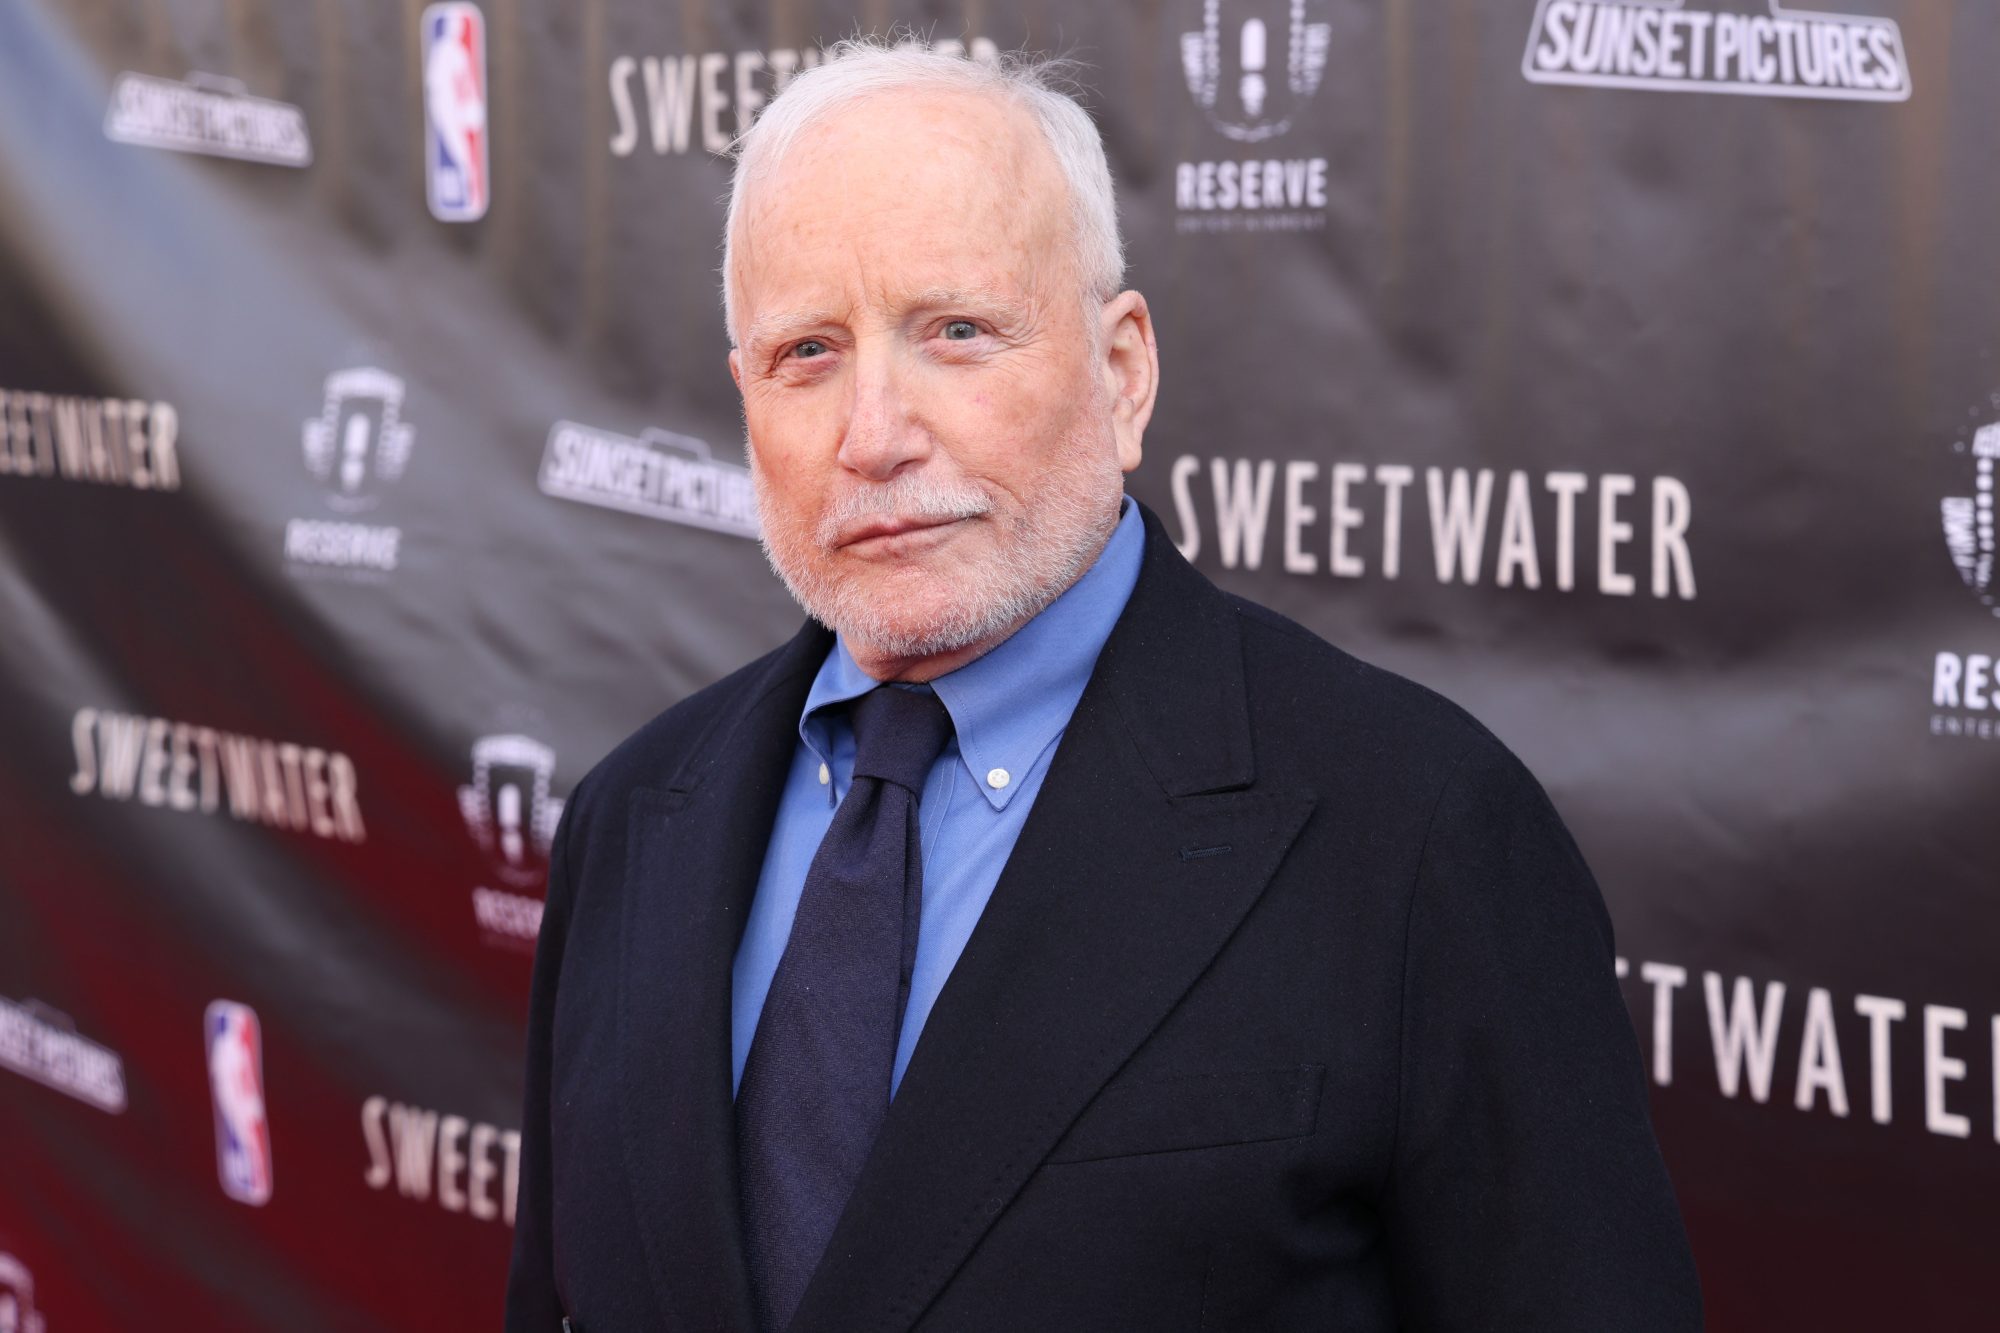 Richard Dreyfuss at the premiere of "Sweetwater" held at the Steven J. Ross Theater on April 11, 2023 in Burbank, California. (Photo by Mark Von Holden/Variety via Getty Images)